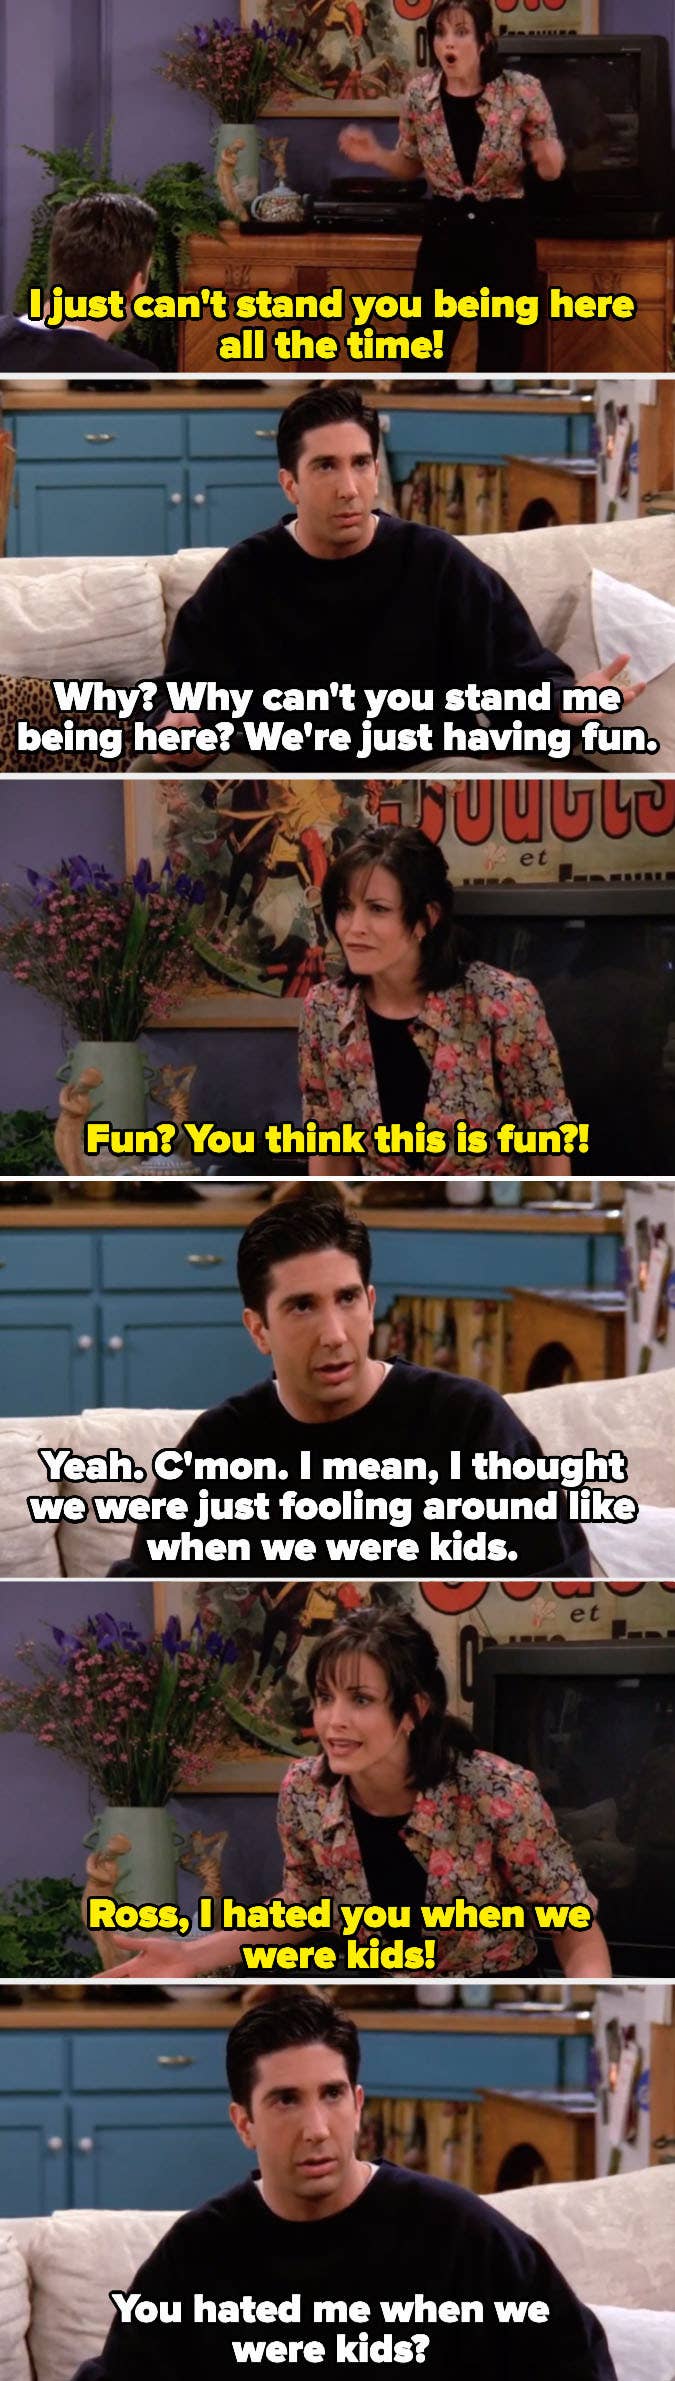 Monica telling Ross she hated him when they were kids